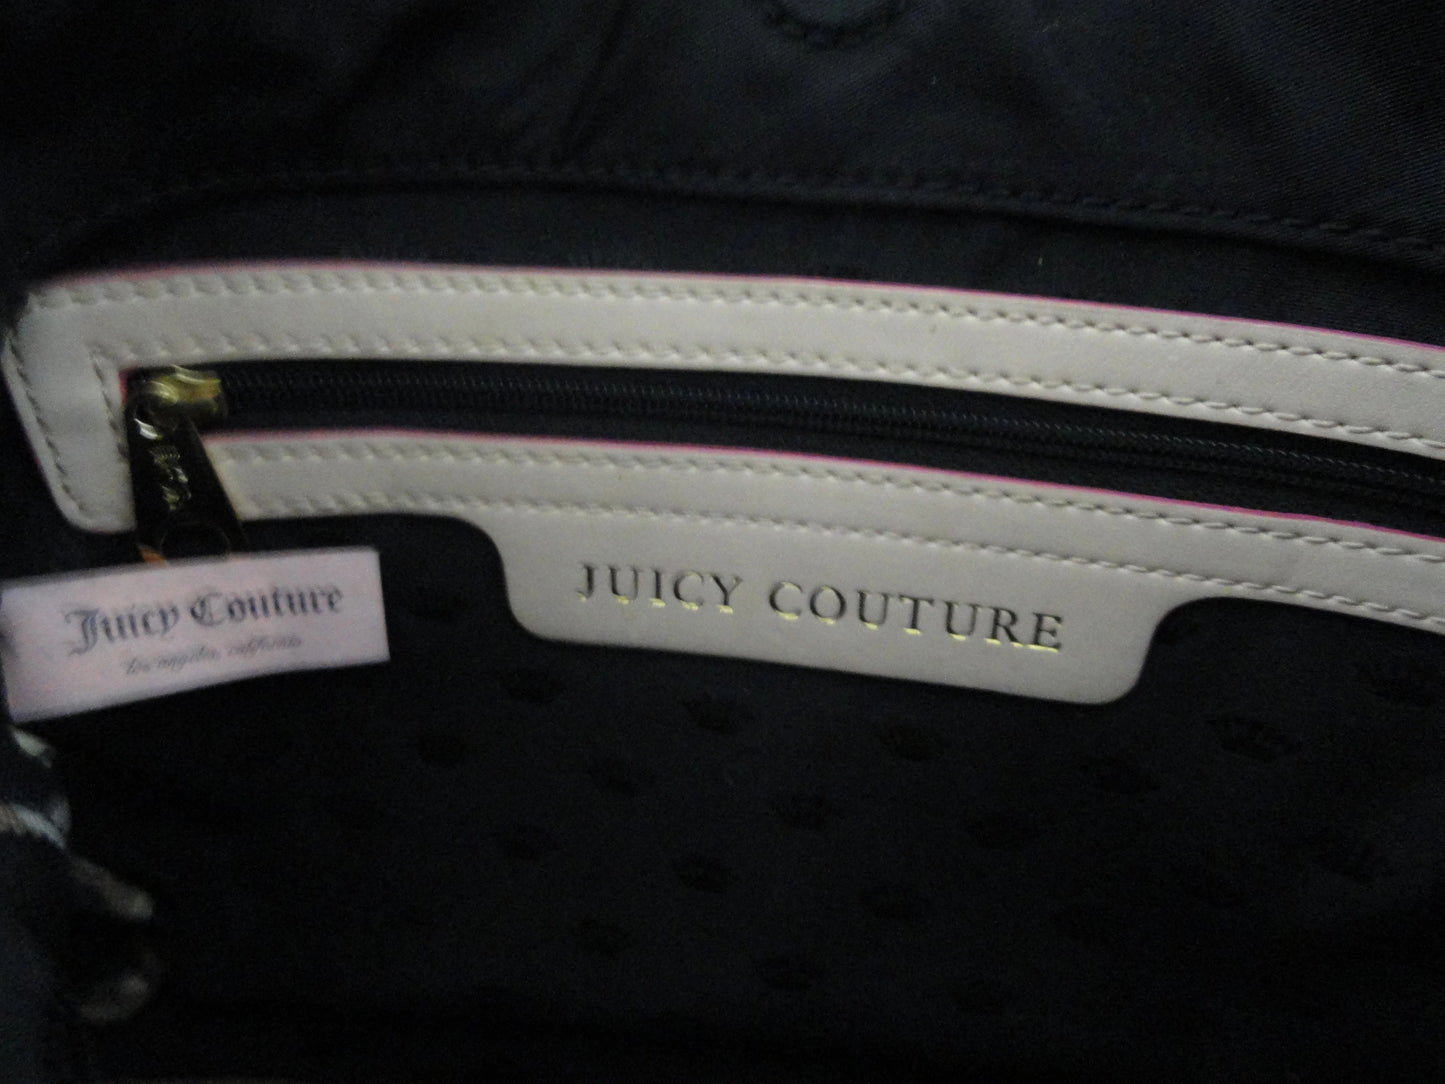 Juicy Couture Black Clutch Bags & Handbags for Women for sale | eBay